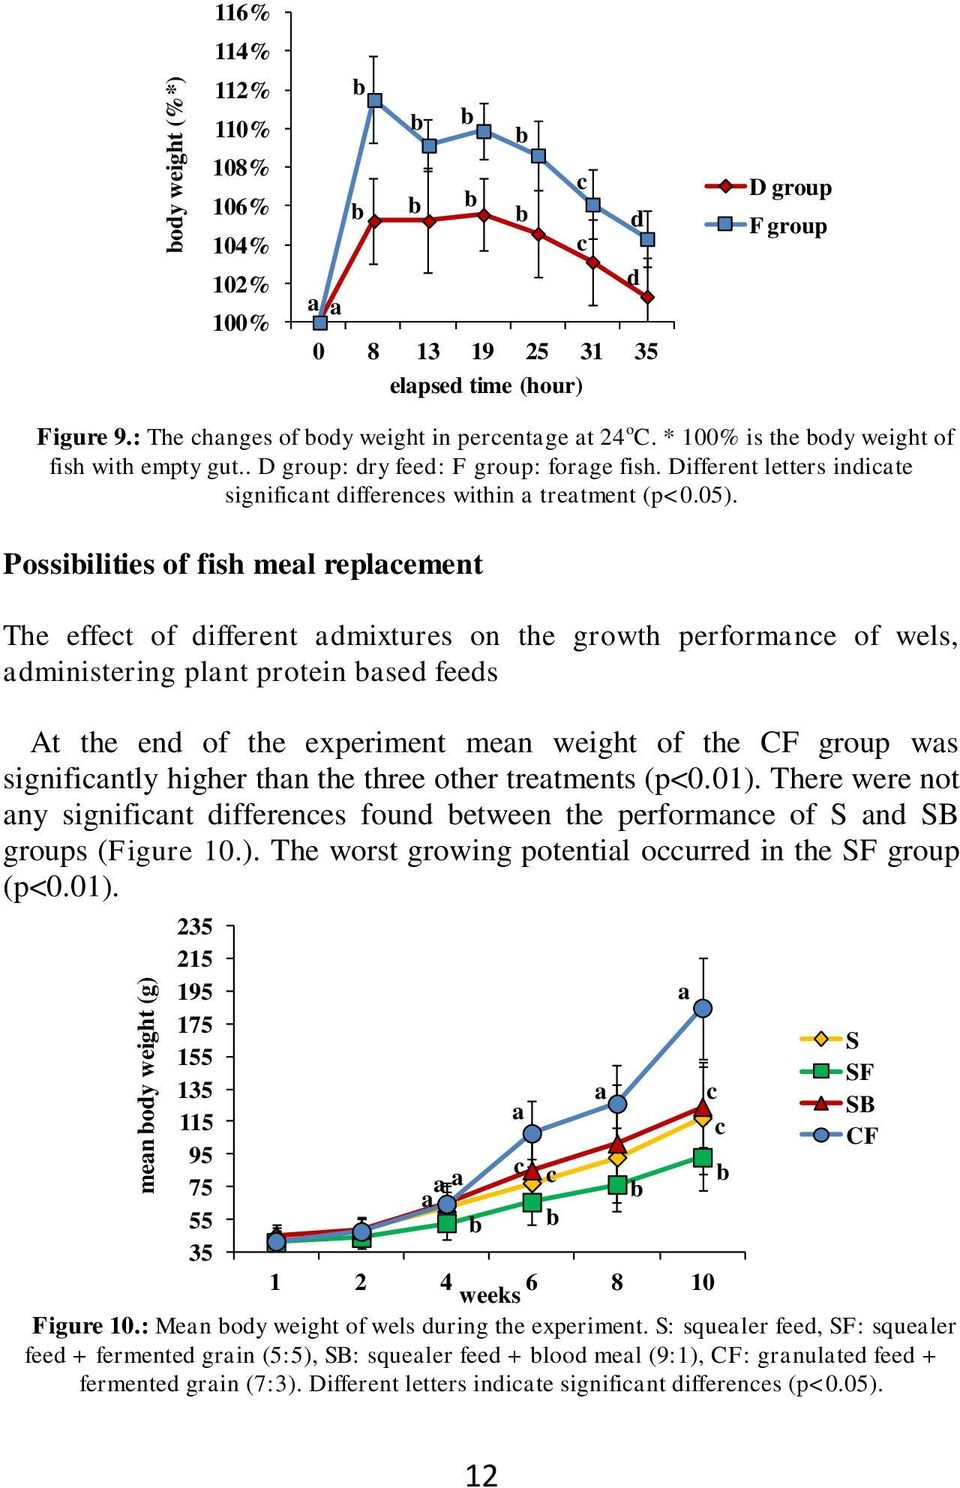 Possiilities of fish mel replcement The effect of different dmixtures on the growth performnce of wels, dministering plnt protein sed feeds At the end of the experiment men weight of the CF group ws